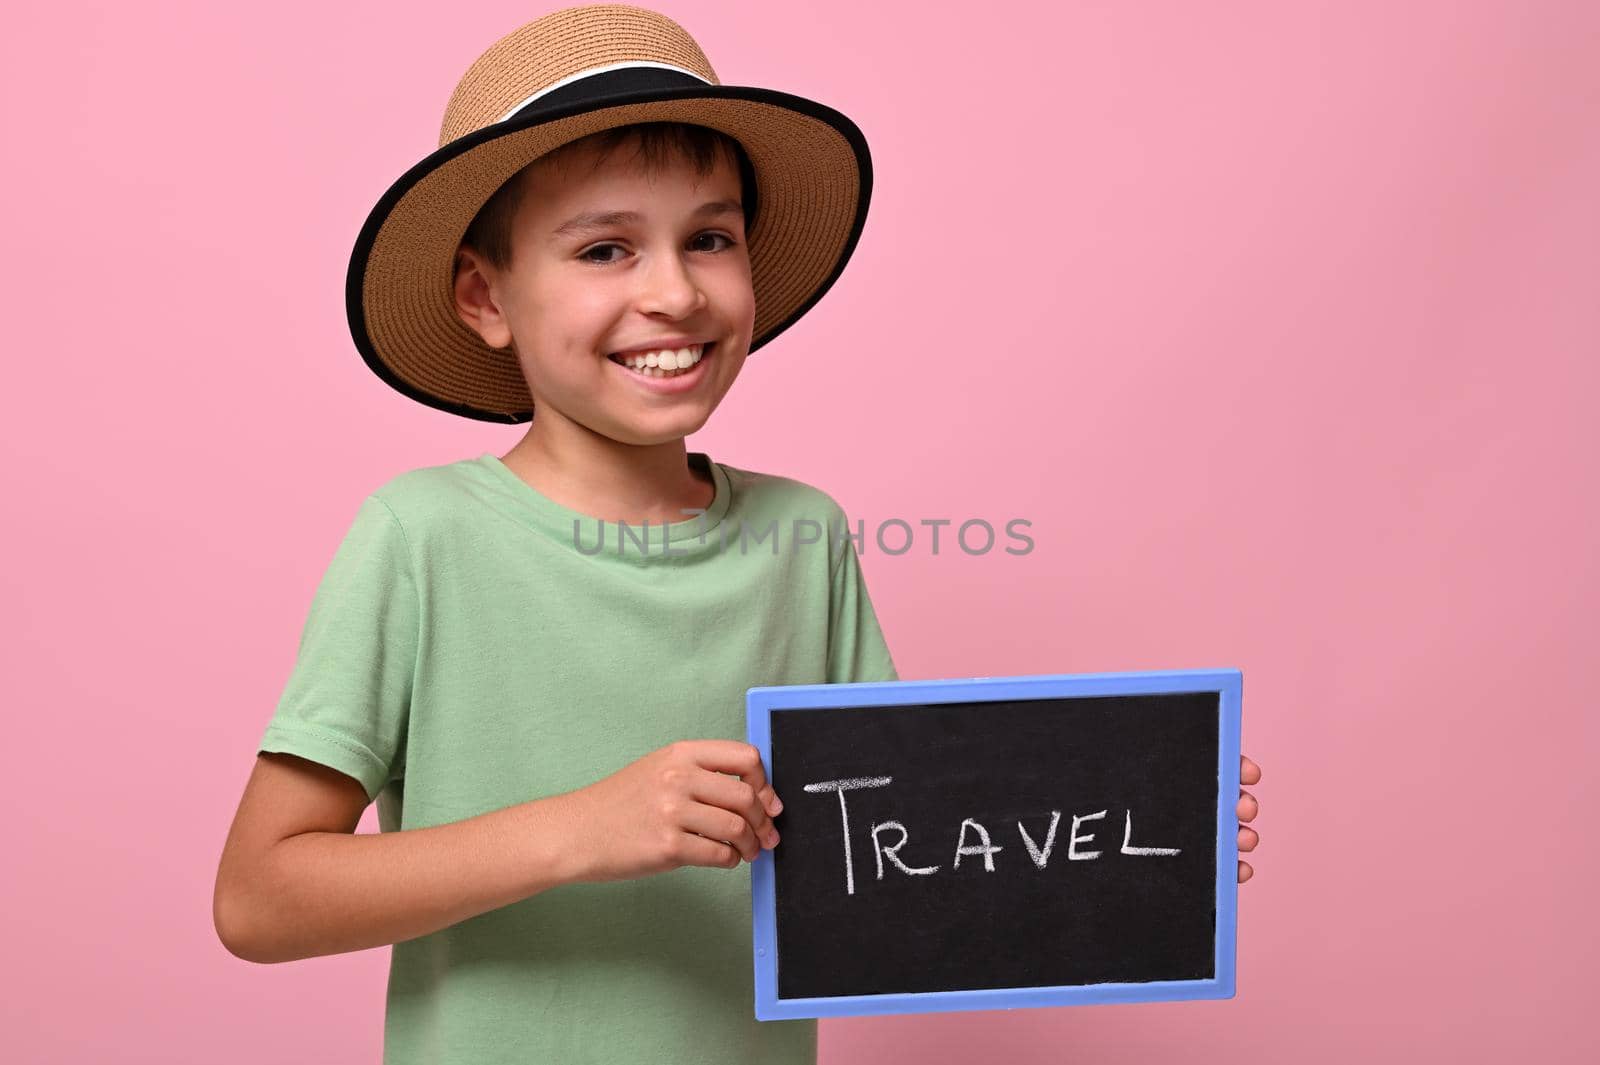 Adorable boy holding a board with travel lettering, smiling, looking at the camera. Pink background with copy space by artgf